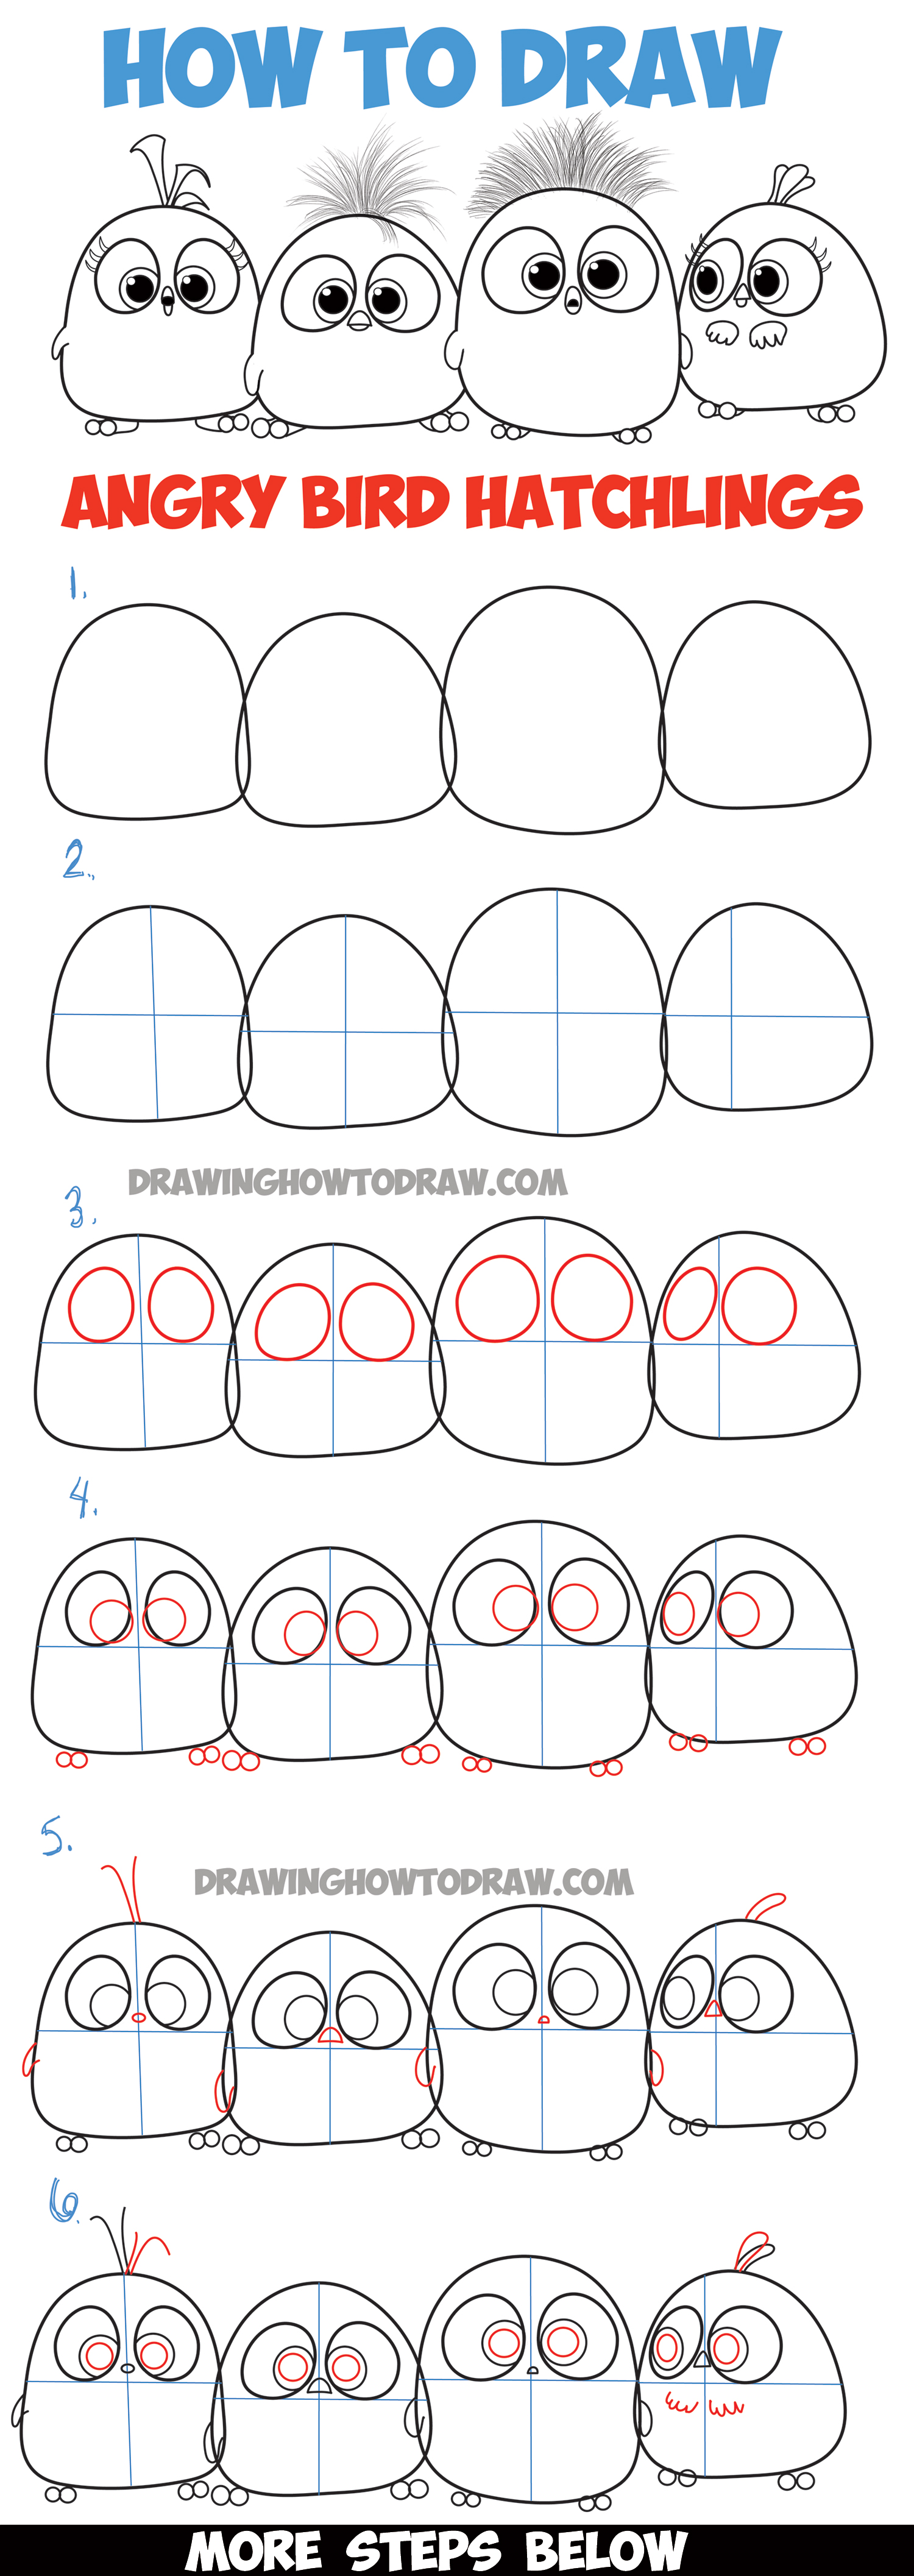 Learn How to Draw Angry Bird Hatchlings Baby Birds - Step by Step Drawing Tutorial